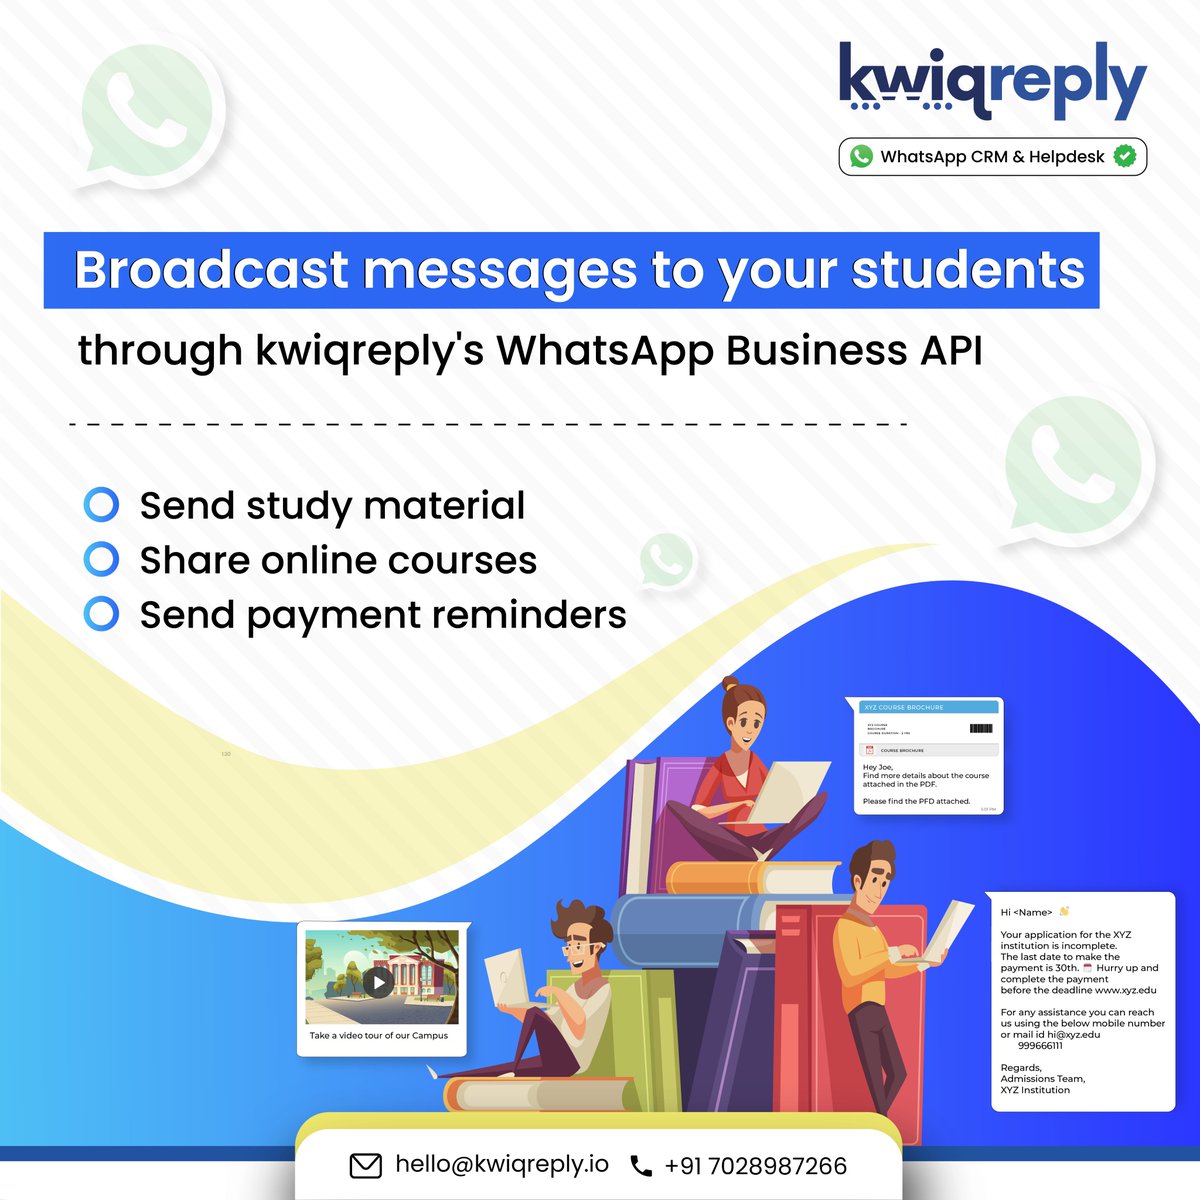 Refine your teaching with kwiqreply's WhatsApp Business API - Send study material, Courses, and Payment reminders directly to your students. 

Book your free demo now- calendly.com/kwiqreply-wa/w…

#studentsupport #kwiqreply #whatsappbusinessapi #reminders #whatsappchatbot #education